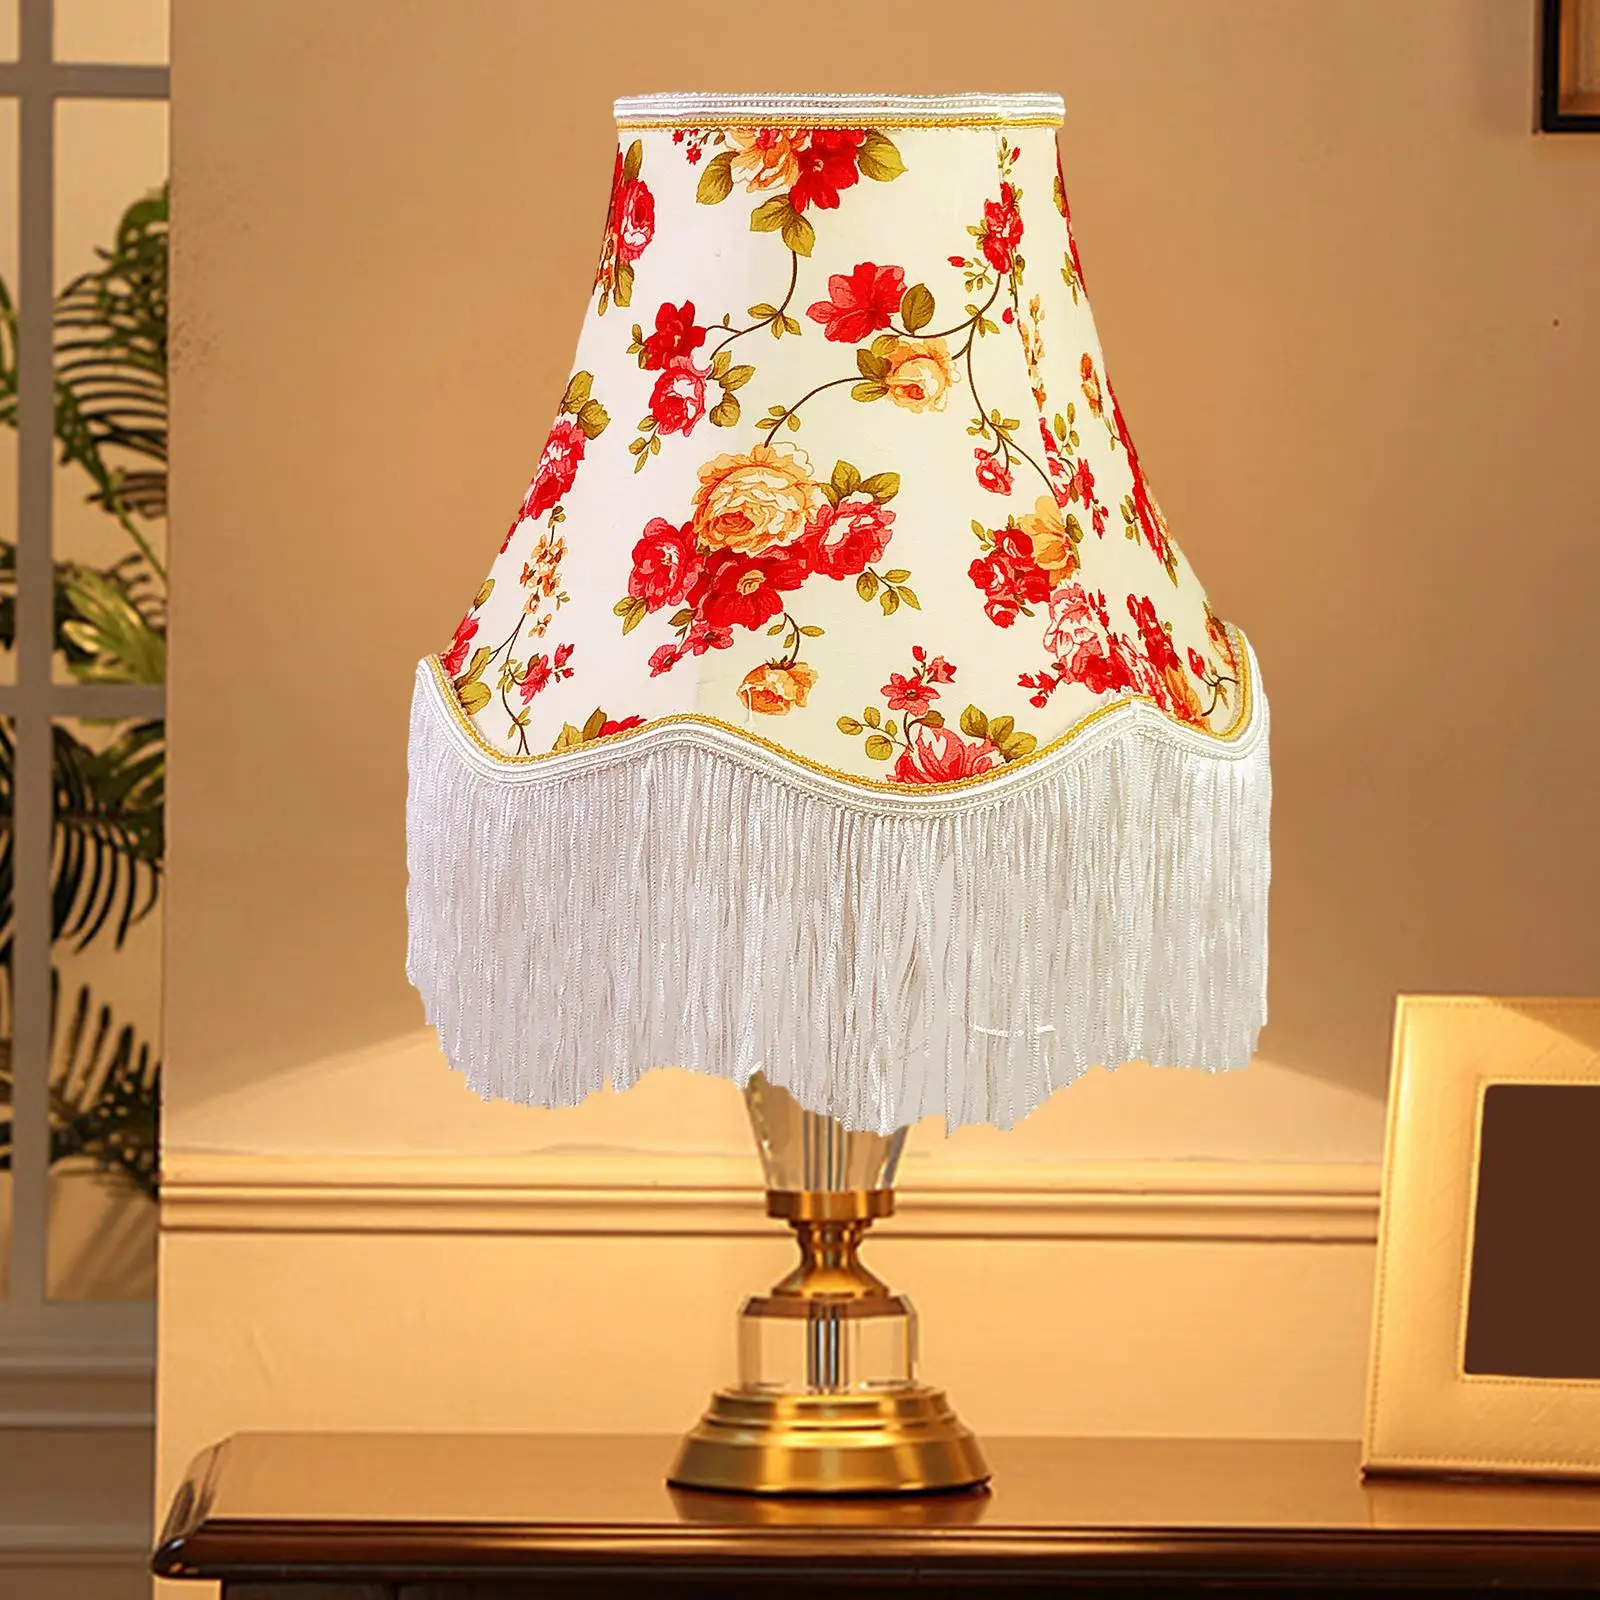 Lamp Shade with Fringe Vintage for Table Lamp Replacement European Lampshade for Bedroom Restaurant Home Office Living Room Cafe